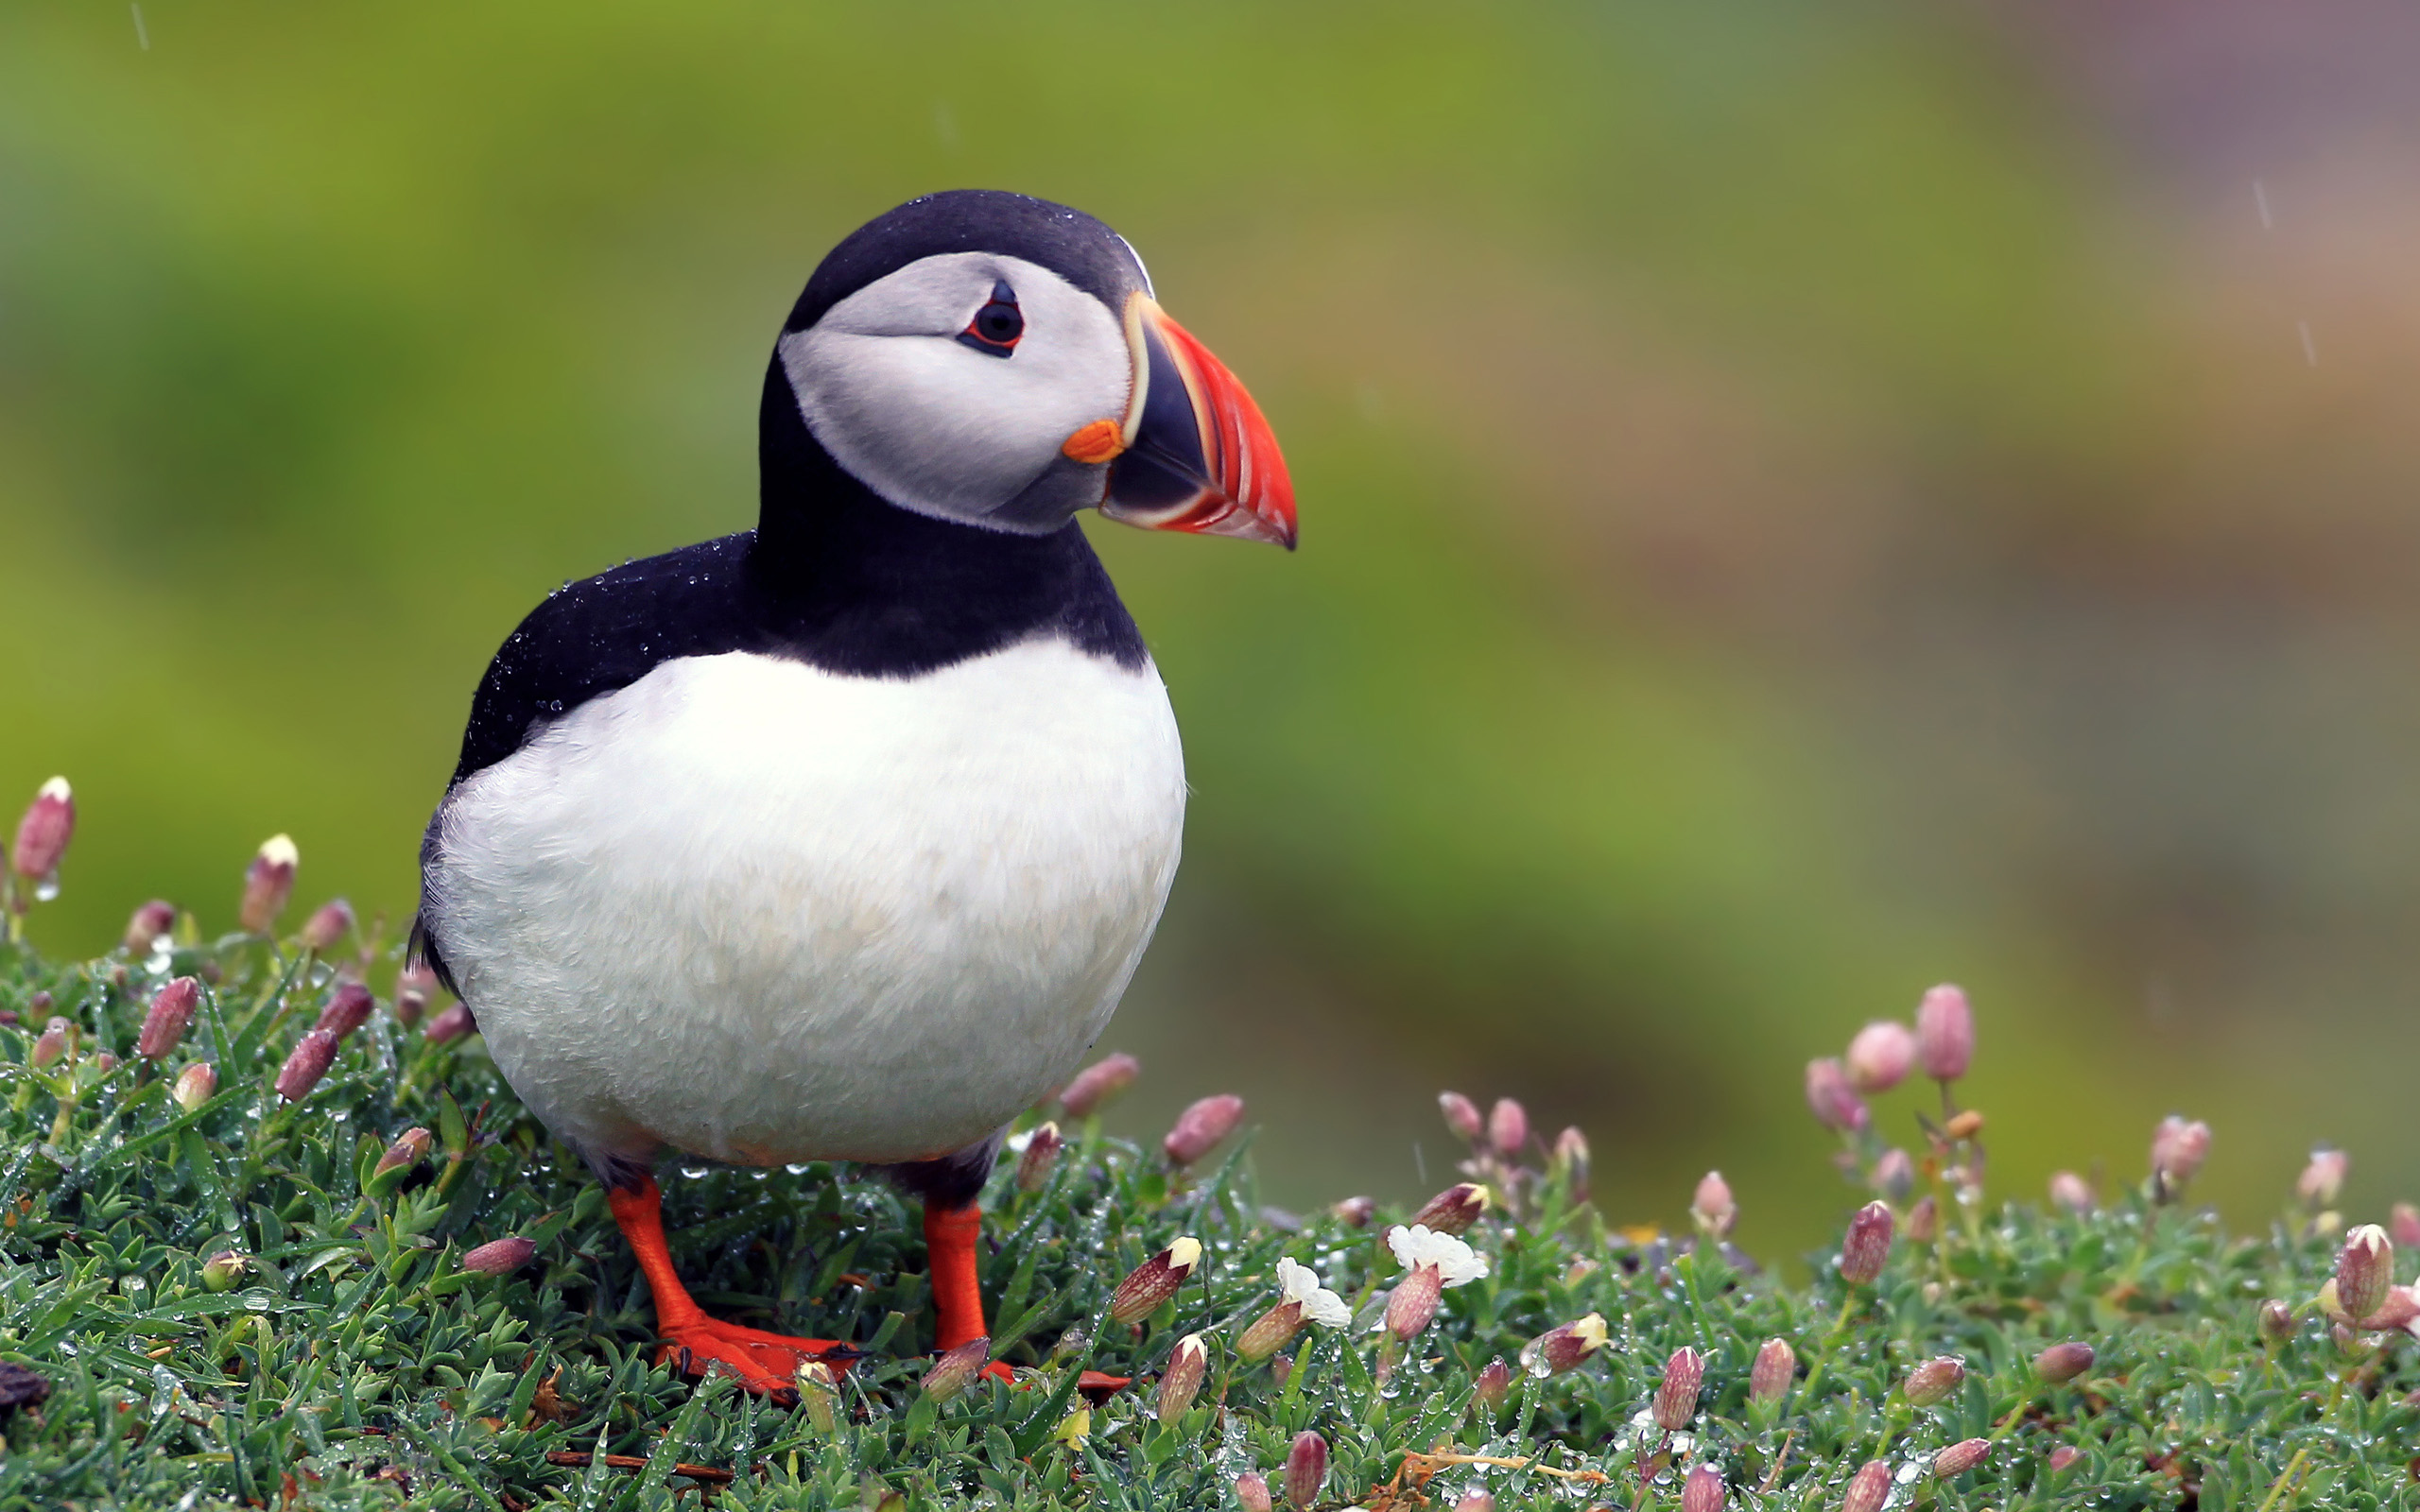 Atlantic Puffin on flowers